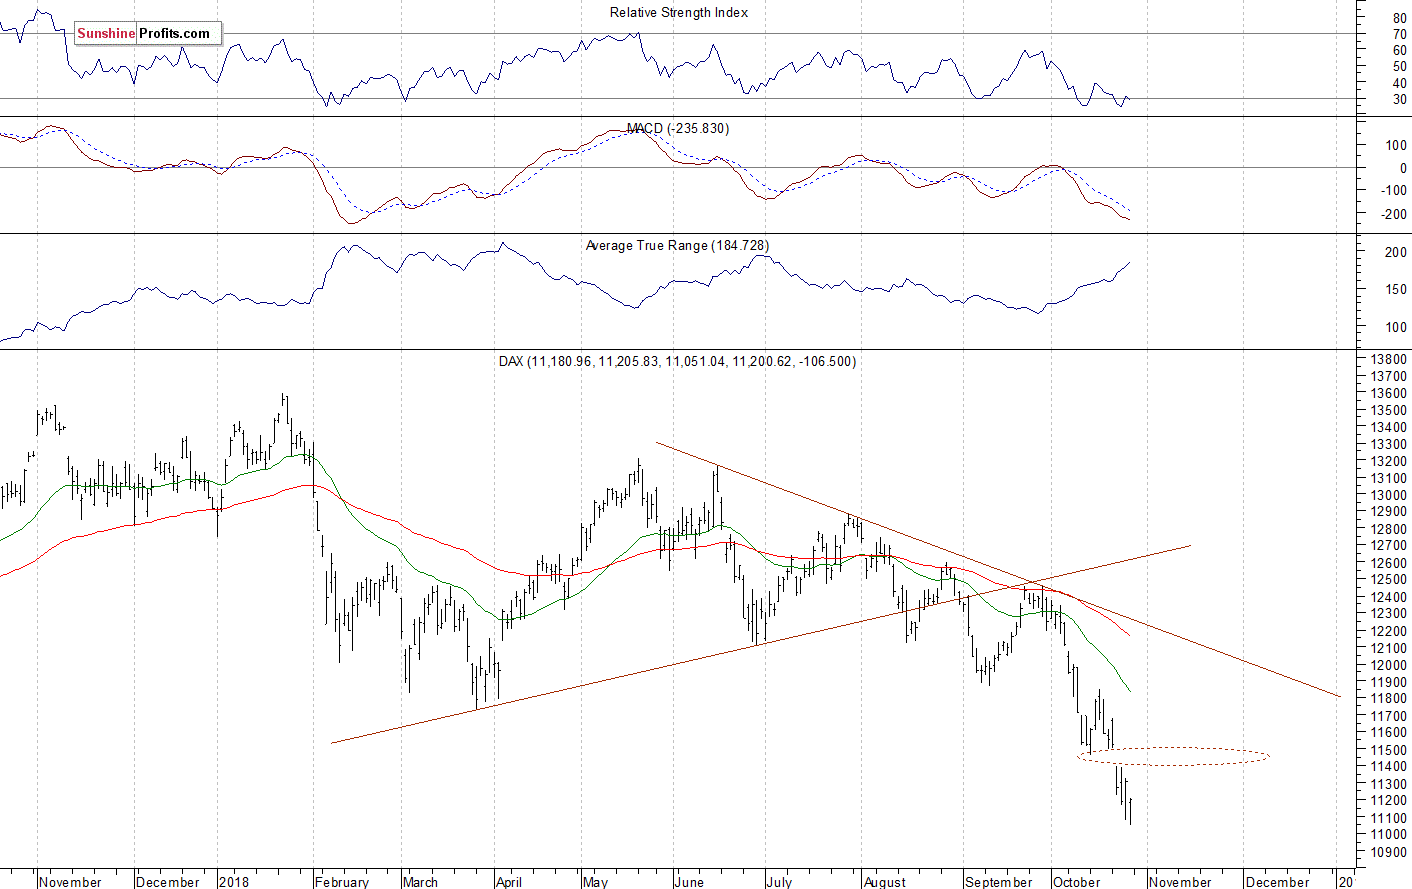 Daily DAX index chart